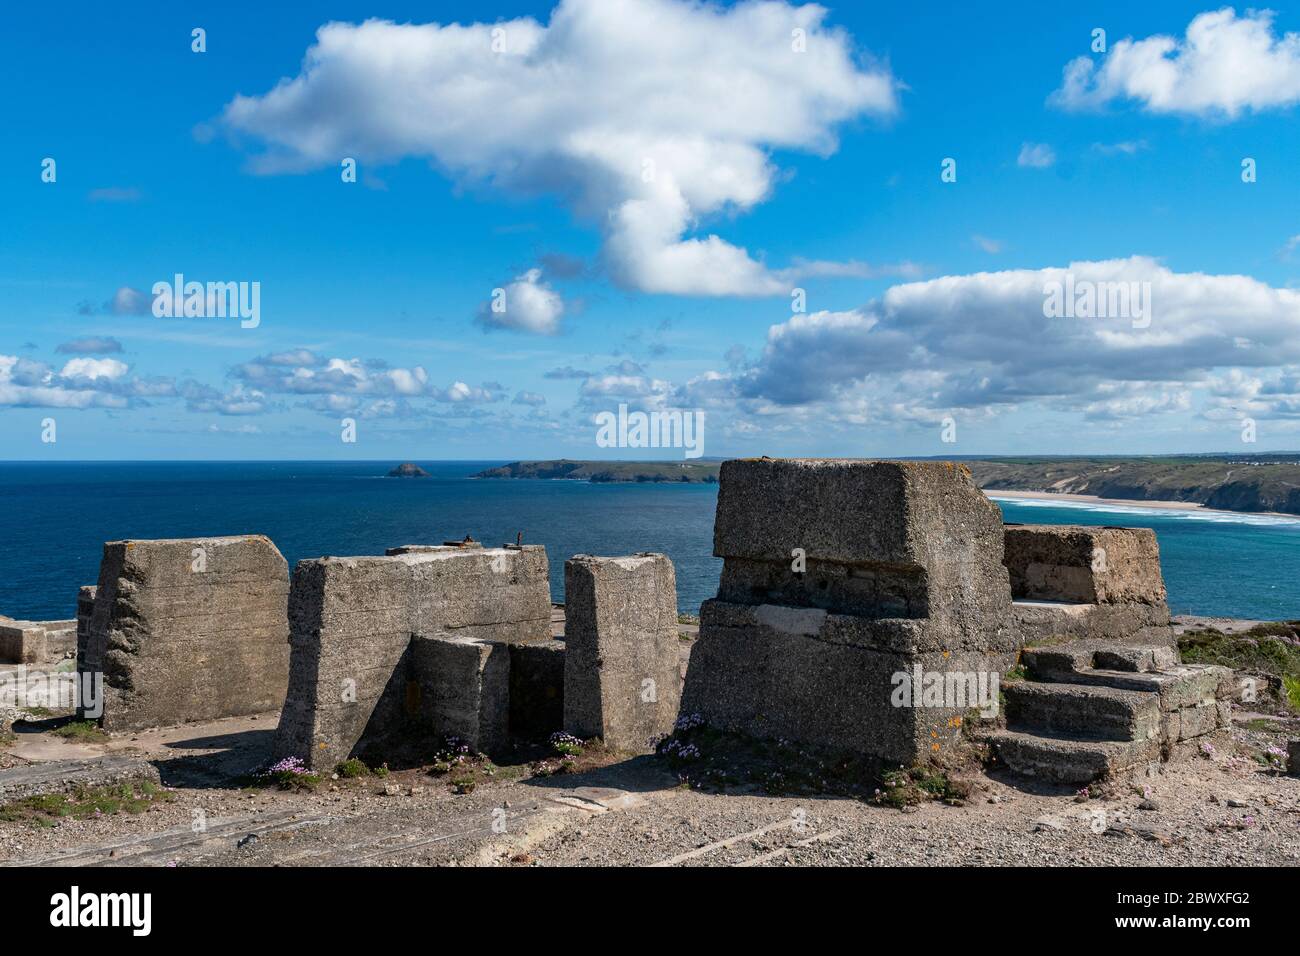 The old Cligga wolfram mine and novels munitions factory near Perranporth in Cornwall, England, UK. Stock Photo